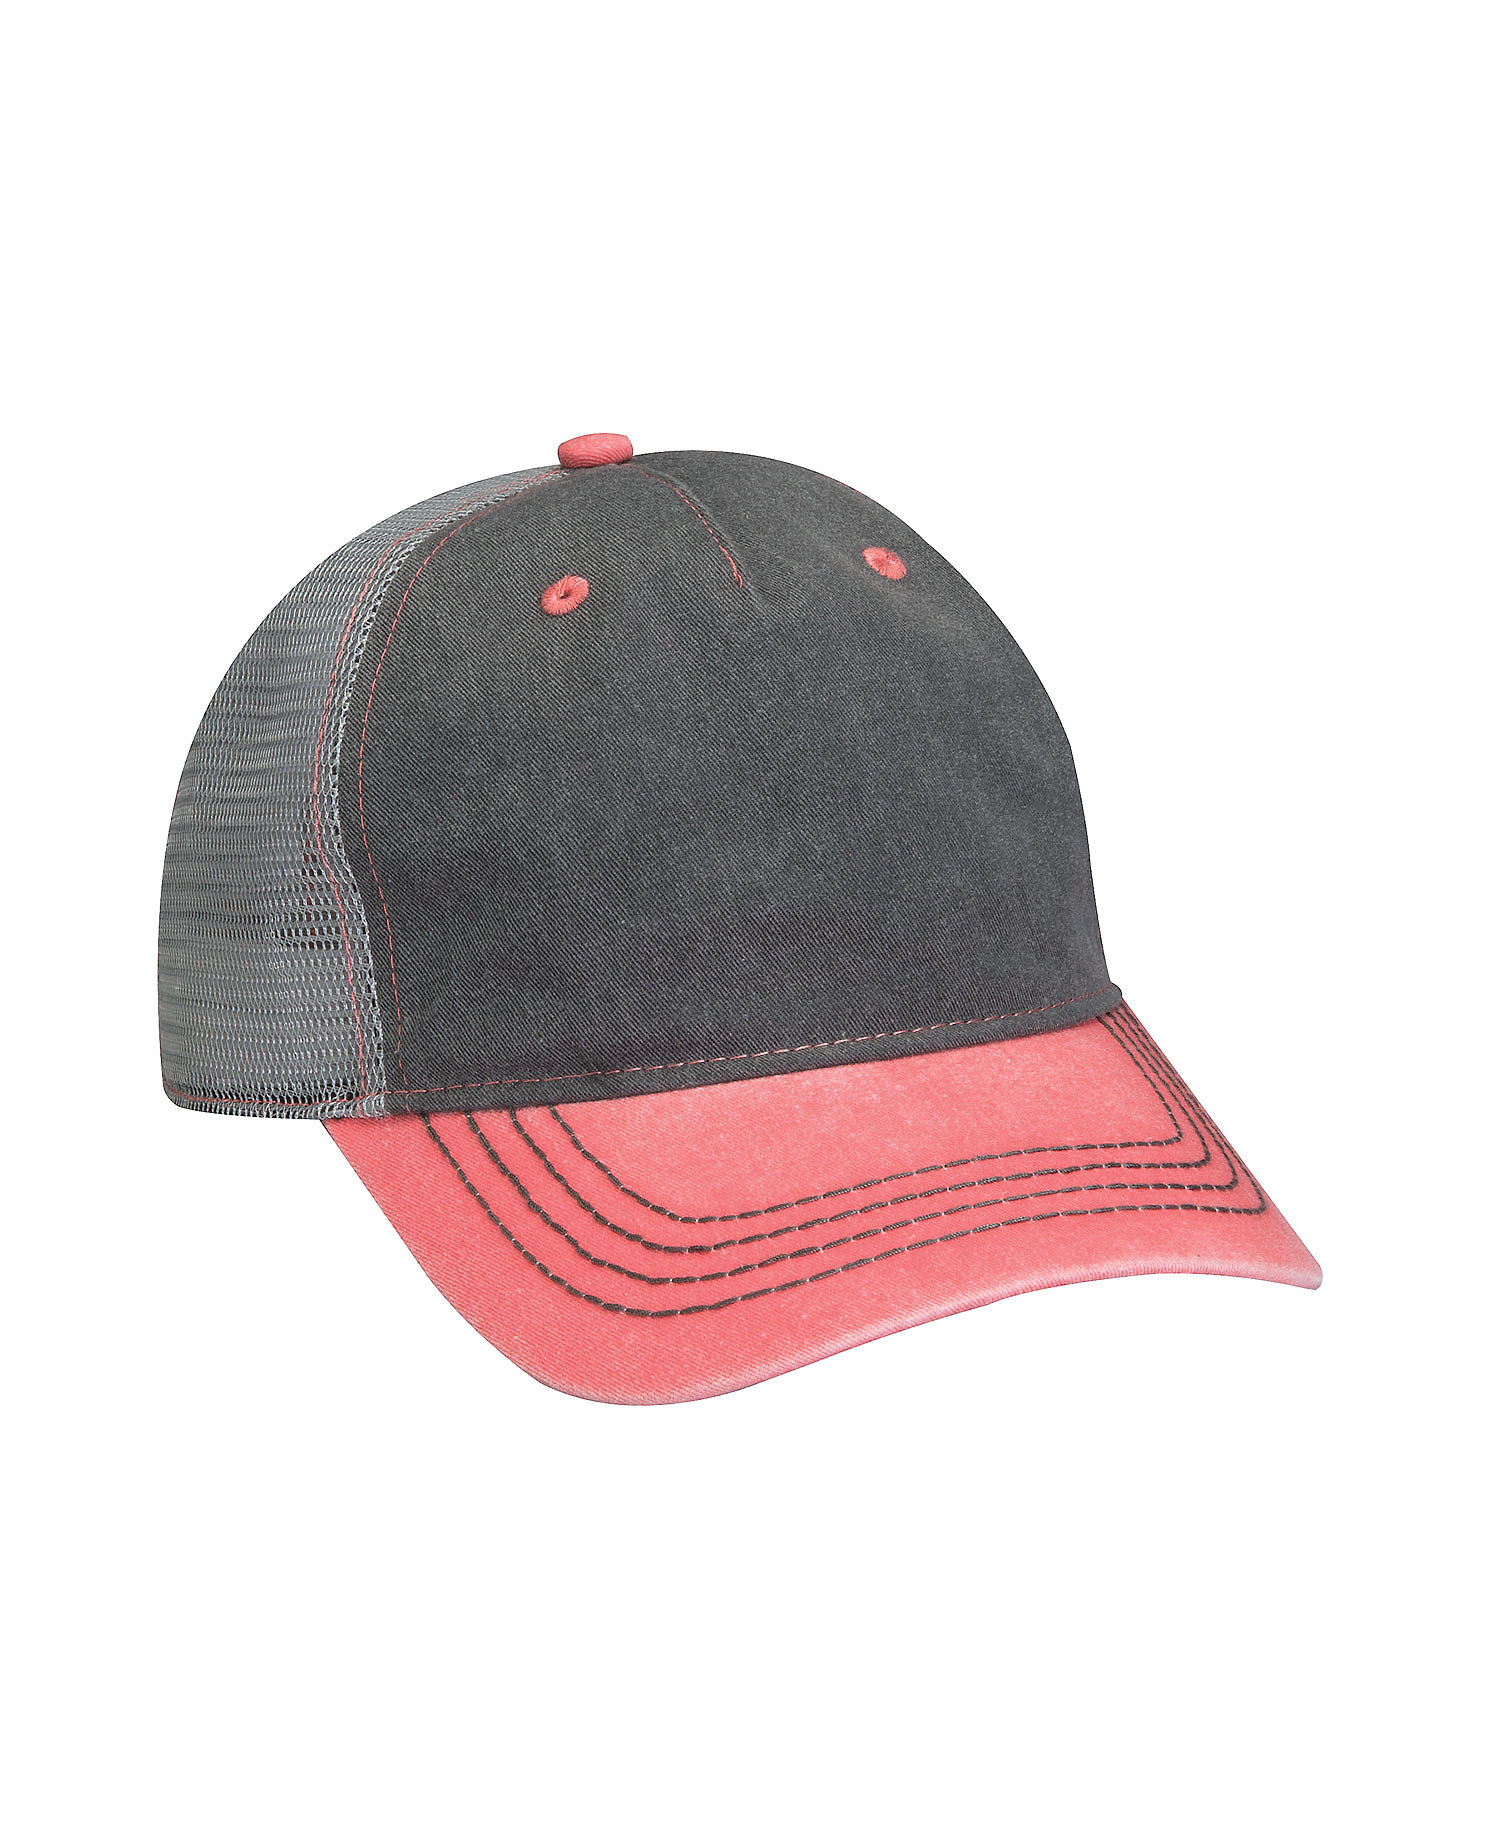 click to view Charcoal/ Coral/ Gray